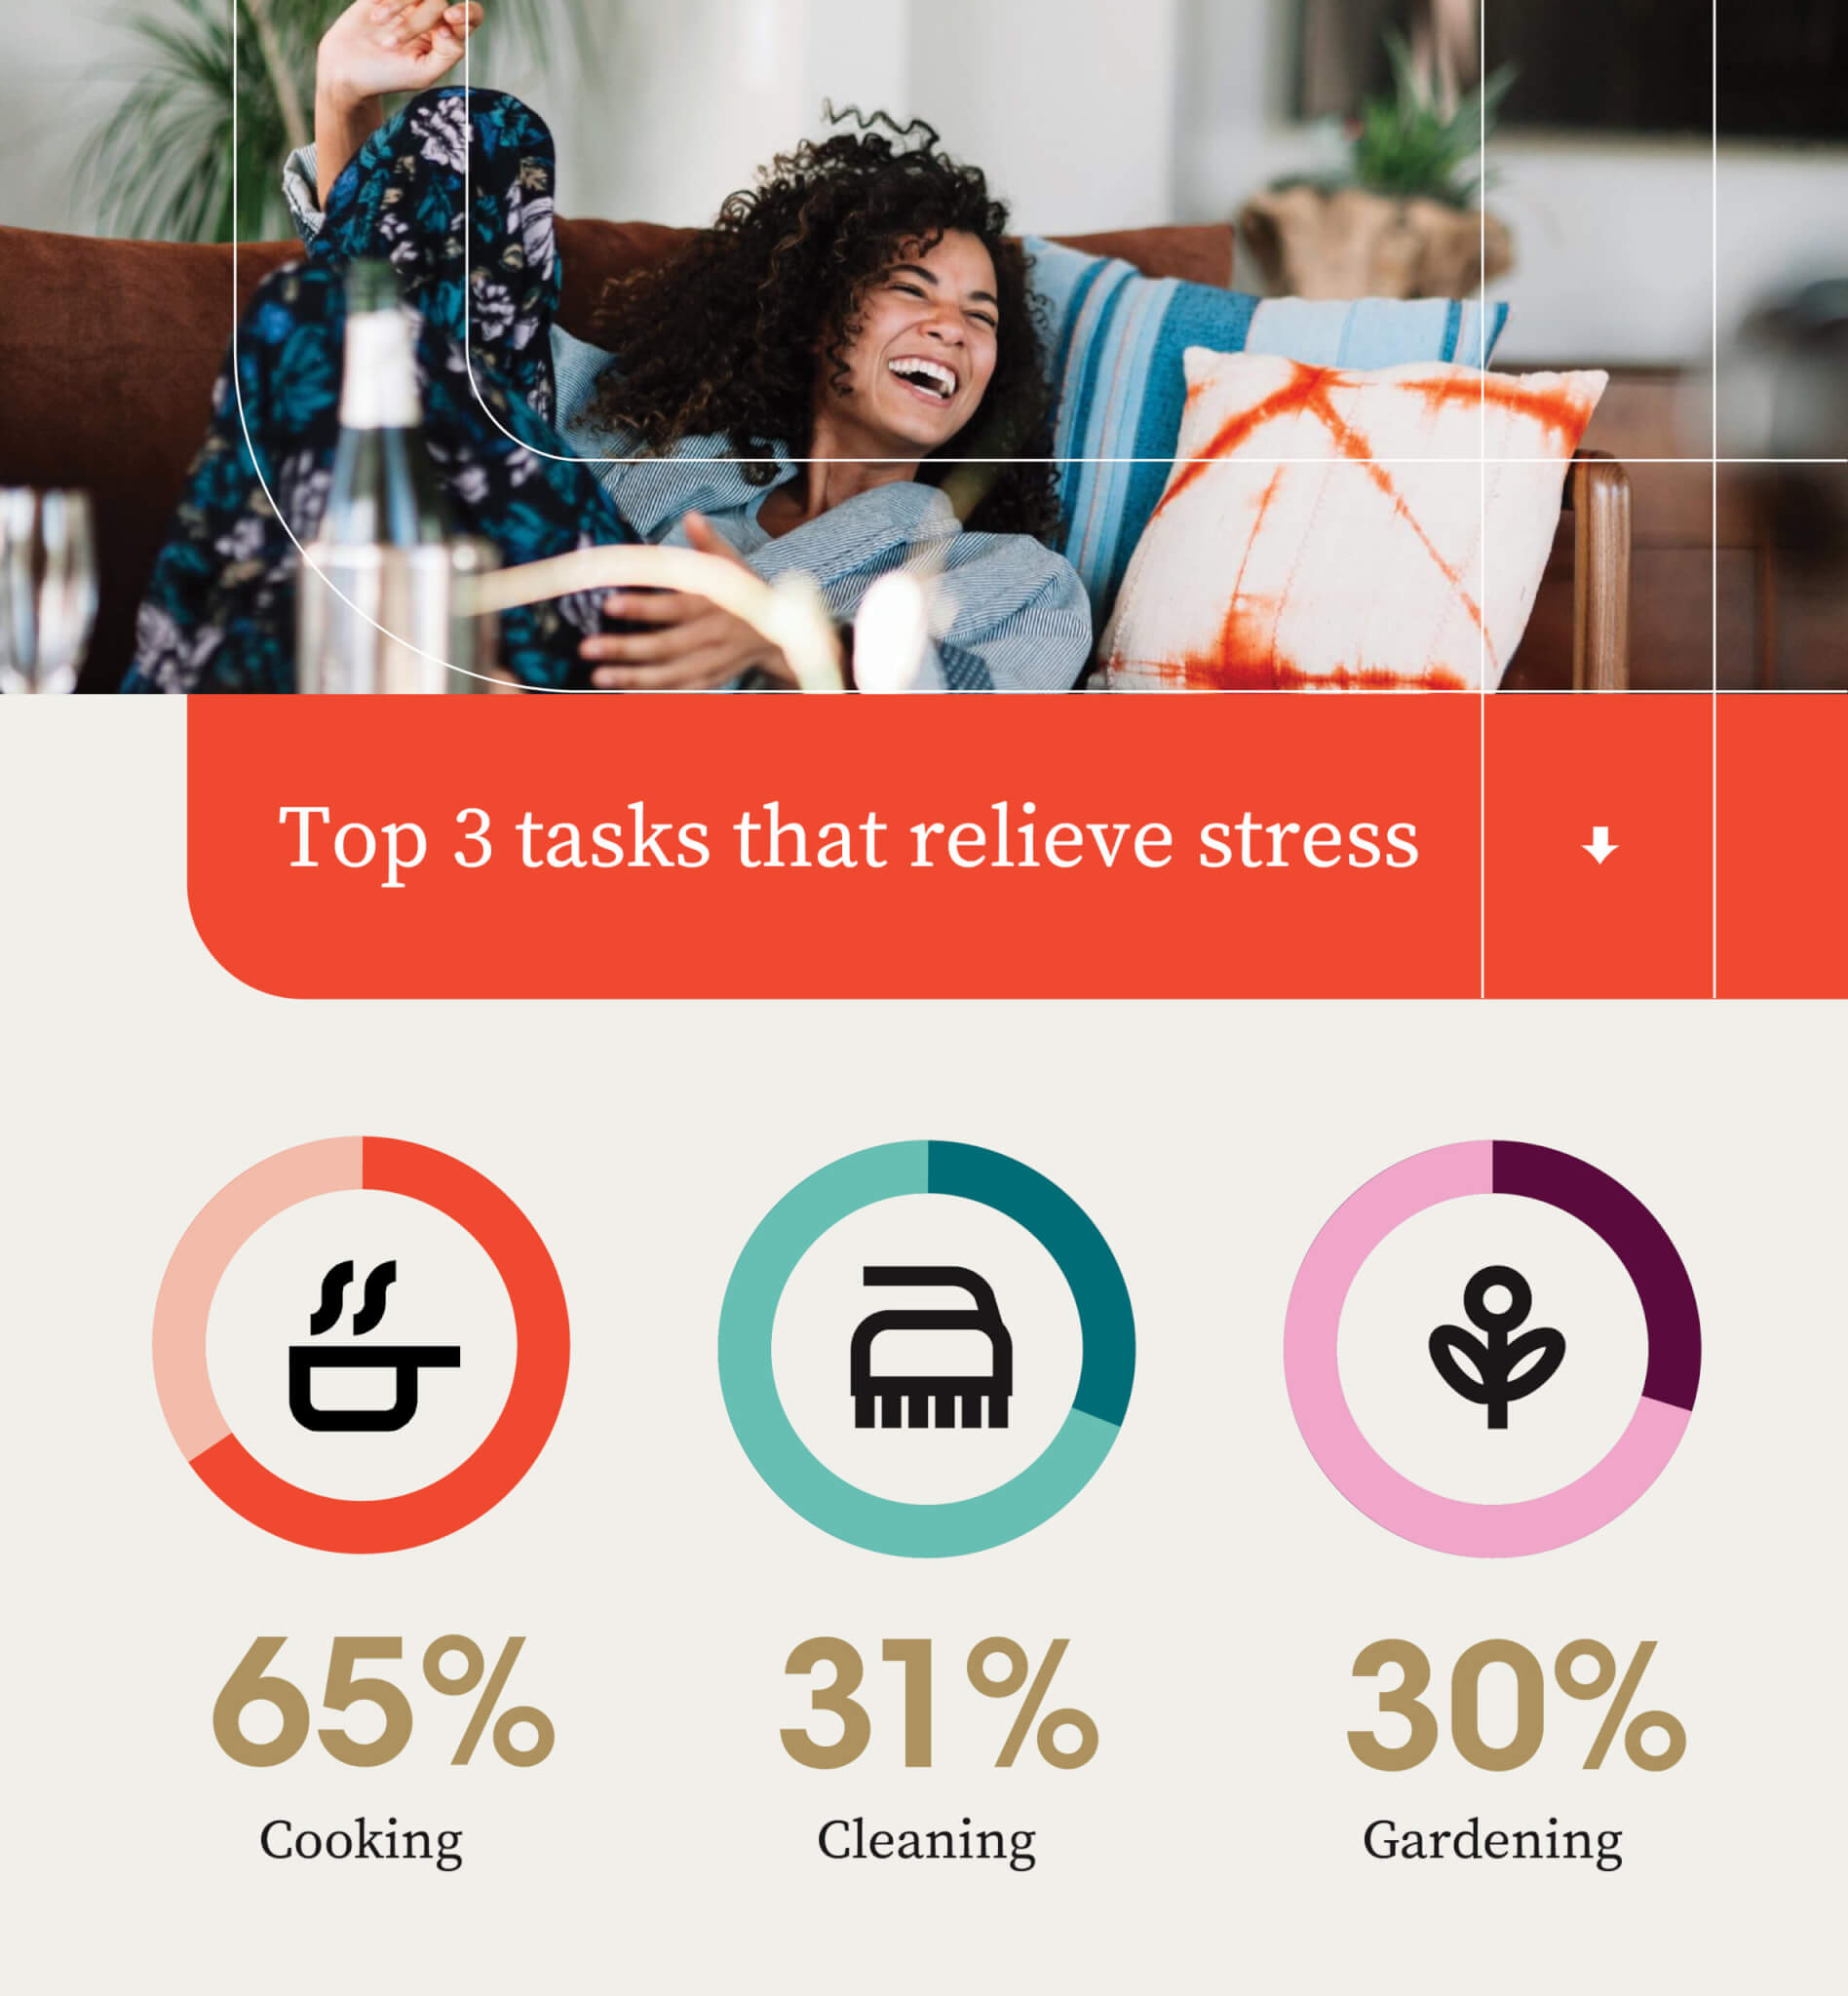 Infographic on the tasks that relieves stress for some Americans